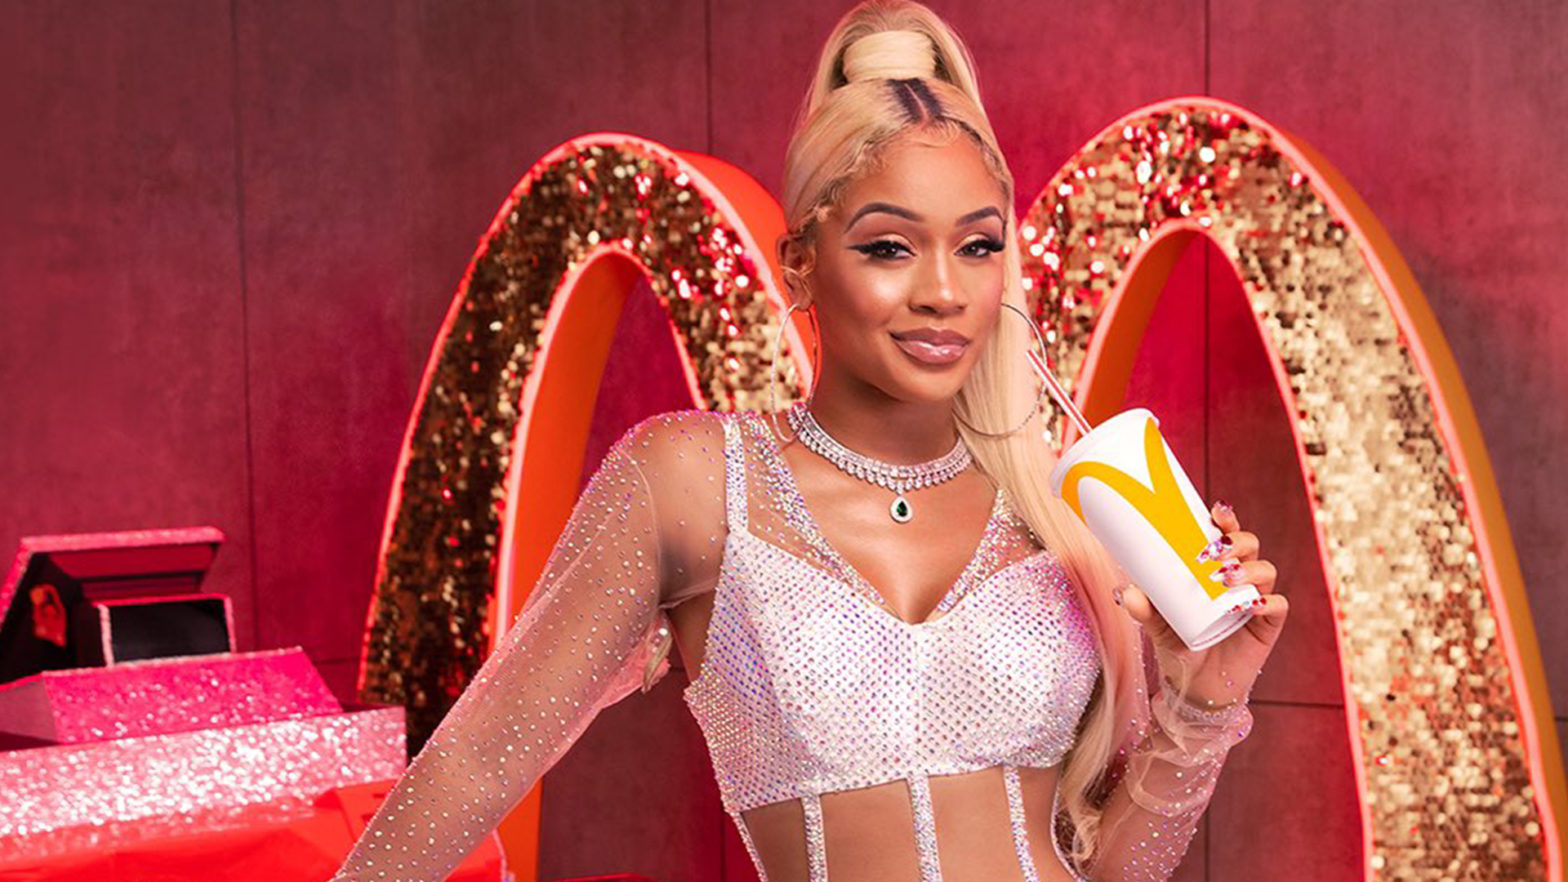 Exclusive: How Saweetie’s Social Media Savvy Helped Her Snag Her Own McDonald’s Meal